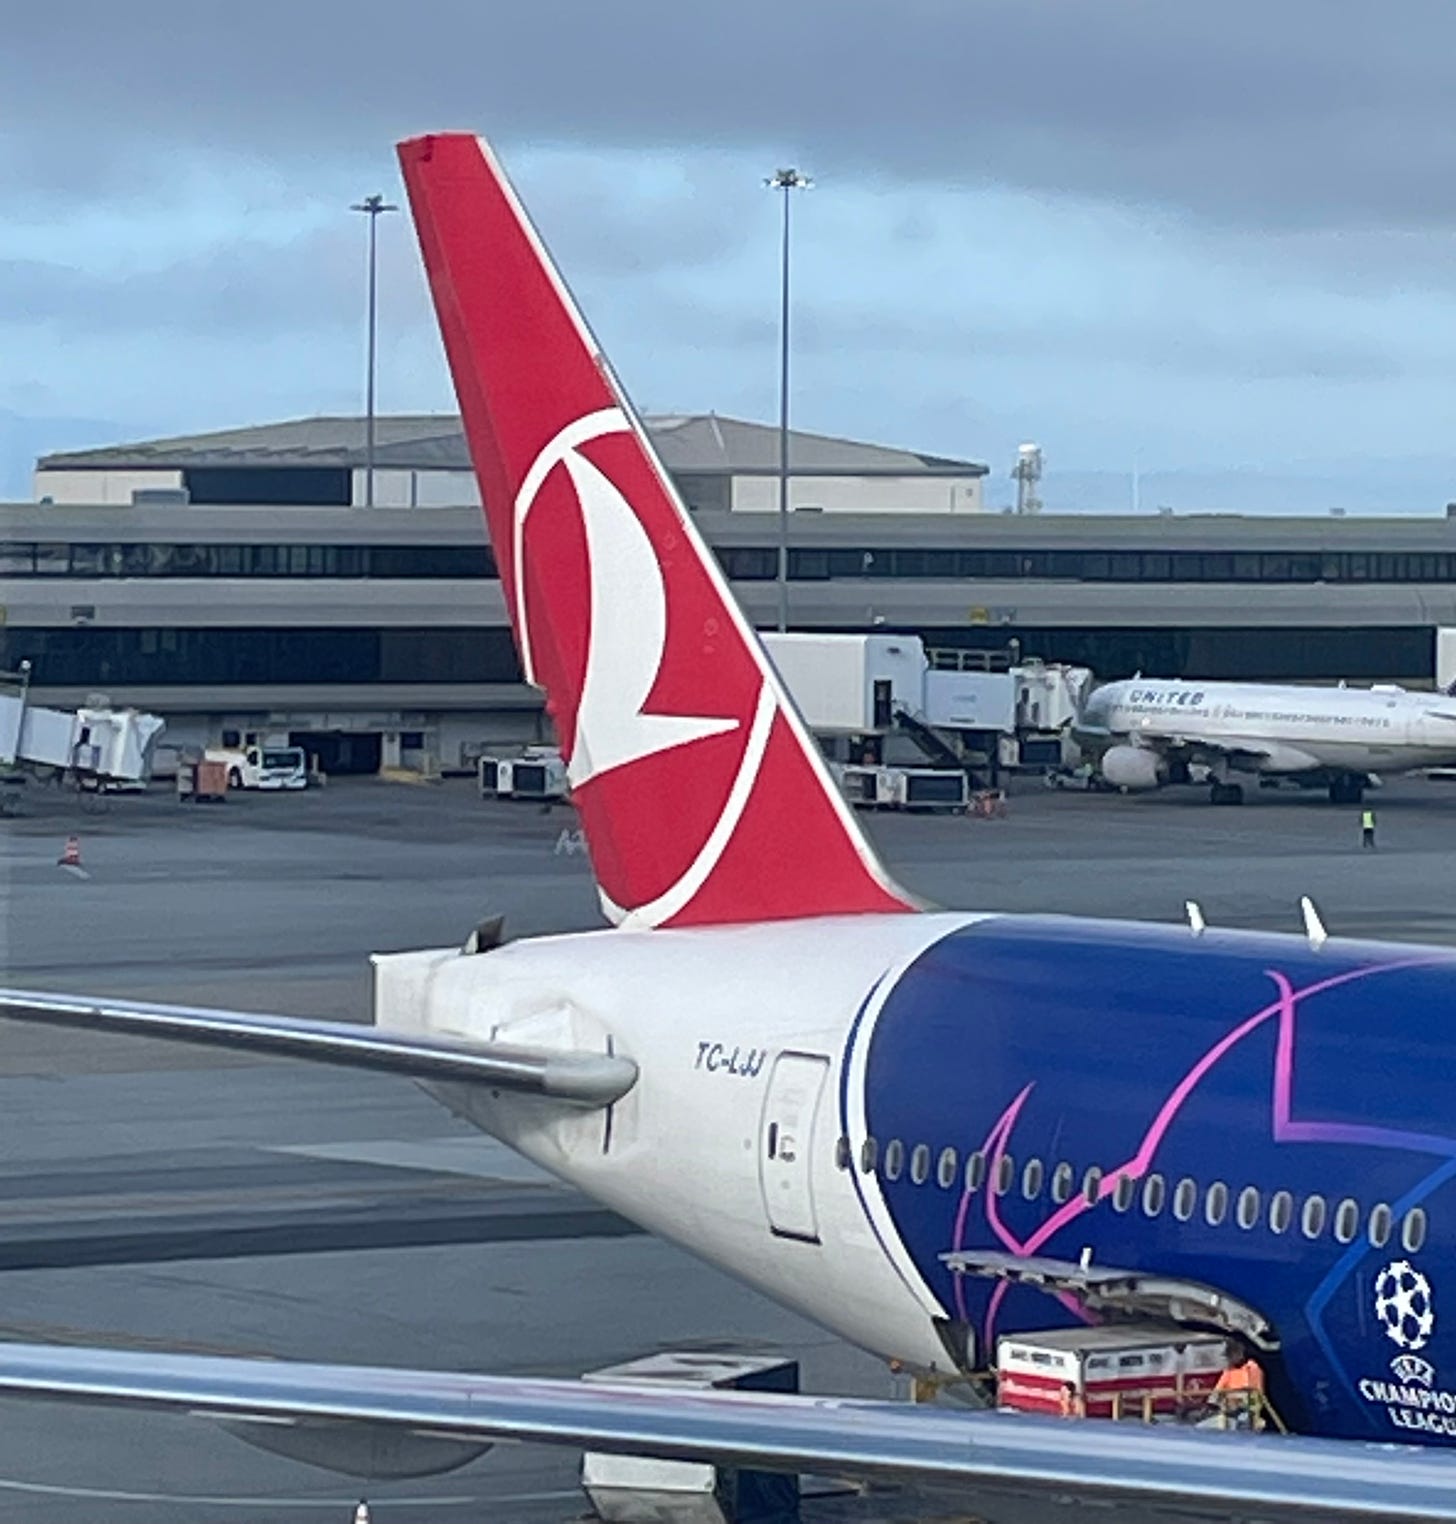 Tail of Turkish Airlines B777 parked at SFO.